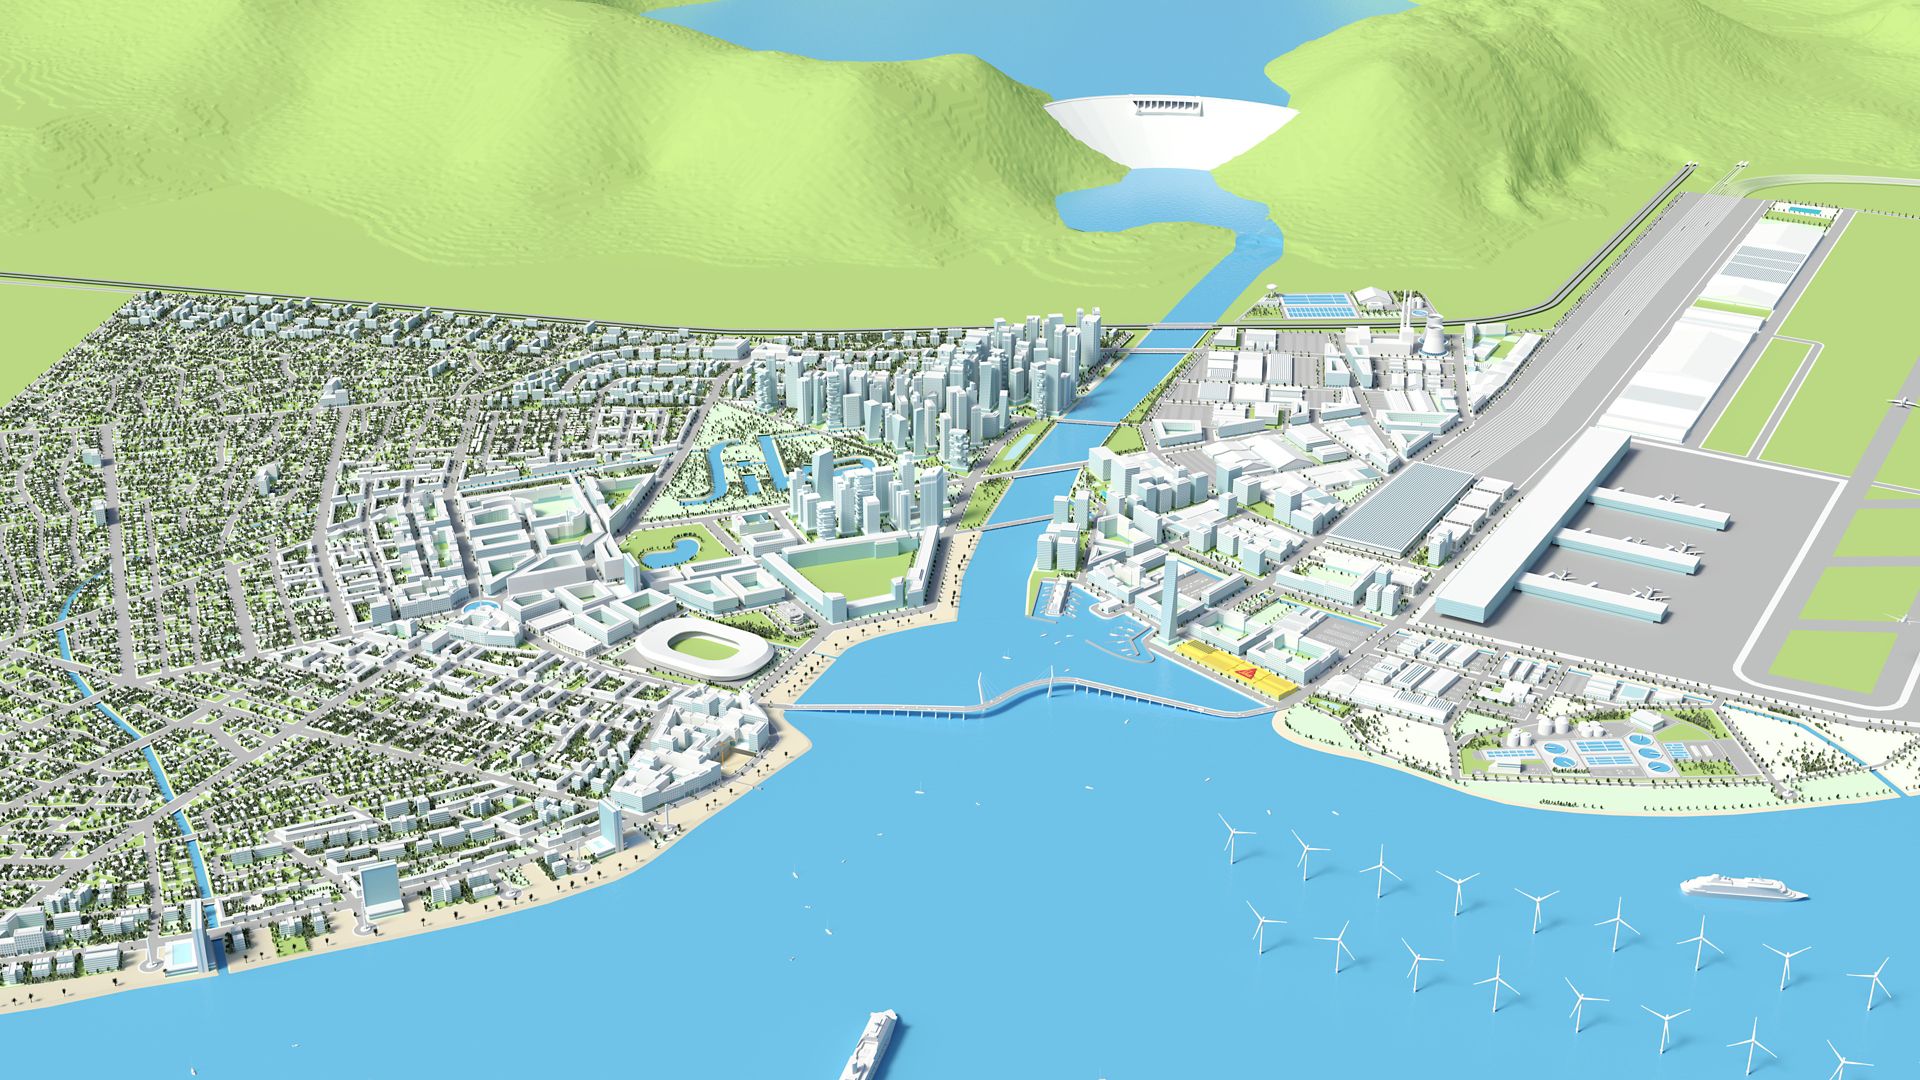 Rendered illustration of the Sika Smart City for all construction projects